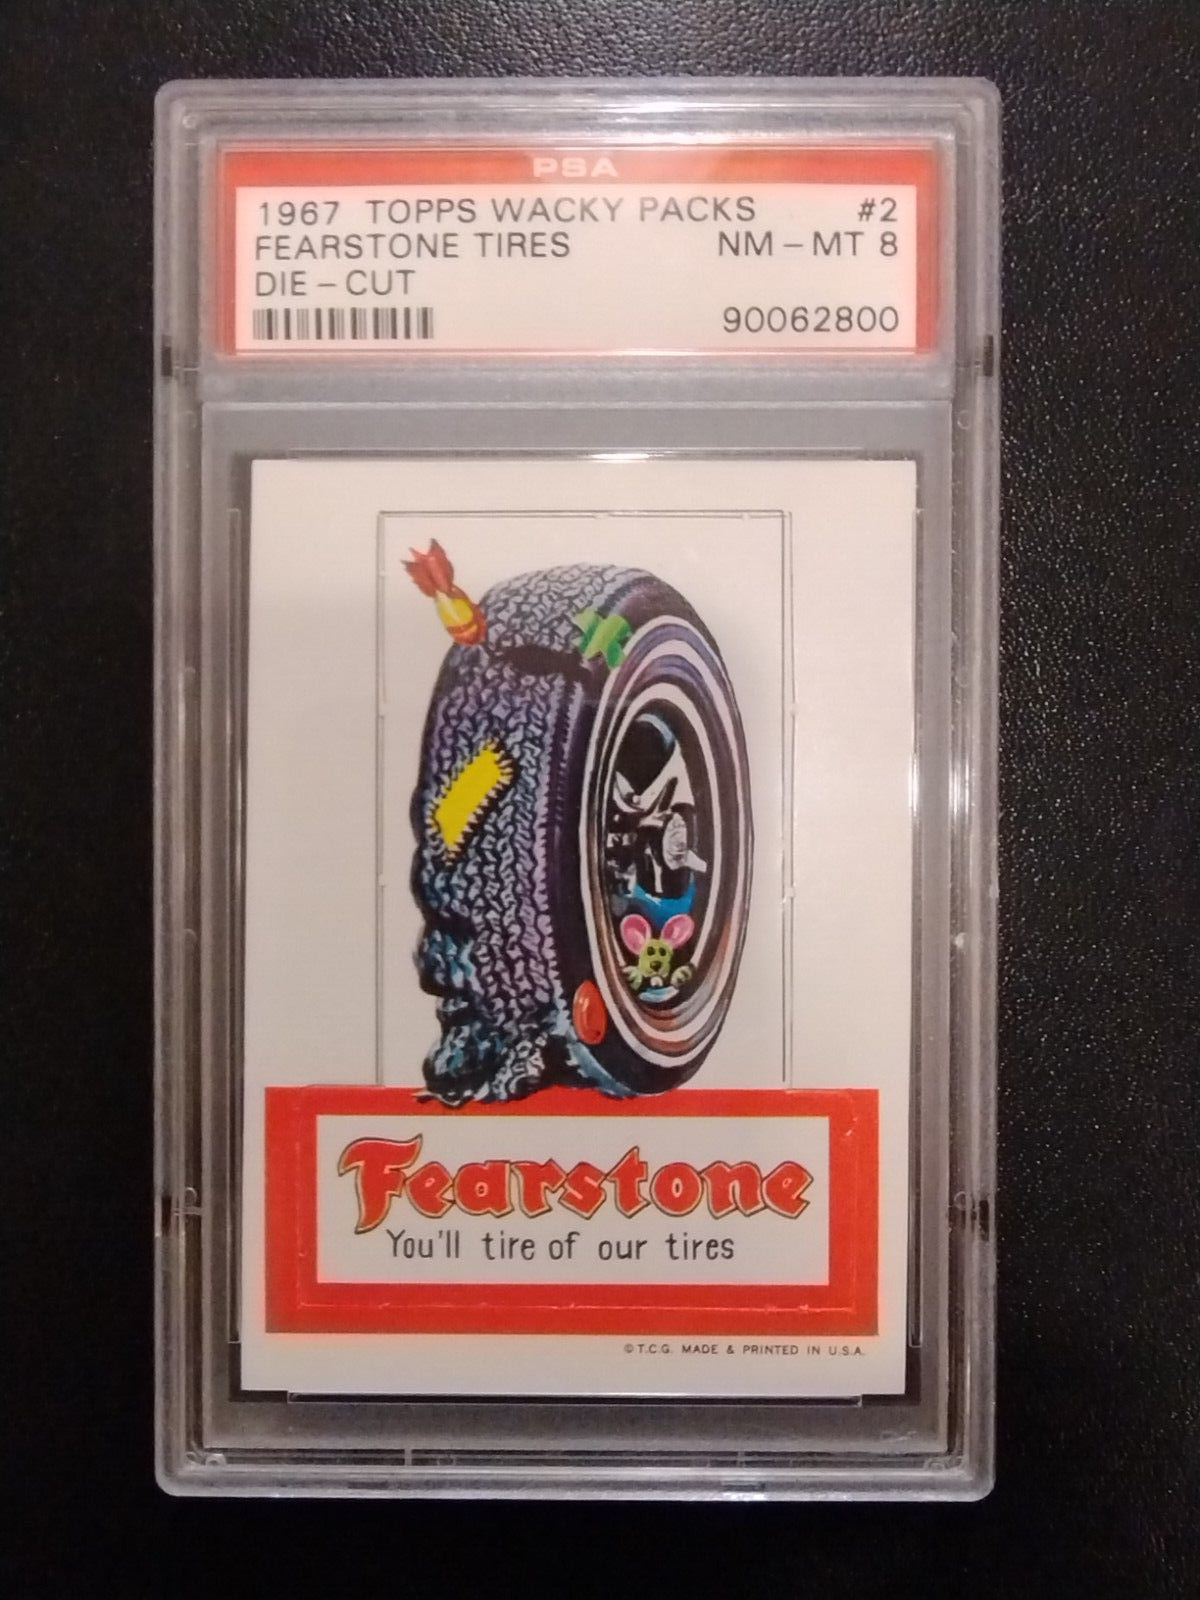 1967 Topps Wacky Packages FEARSTONE TIRES Die Cut #2, PSA 8 NM/Mint